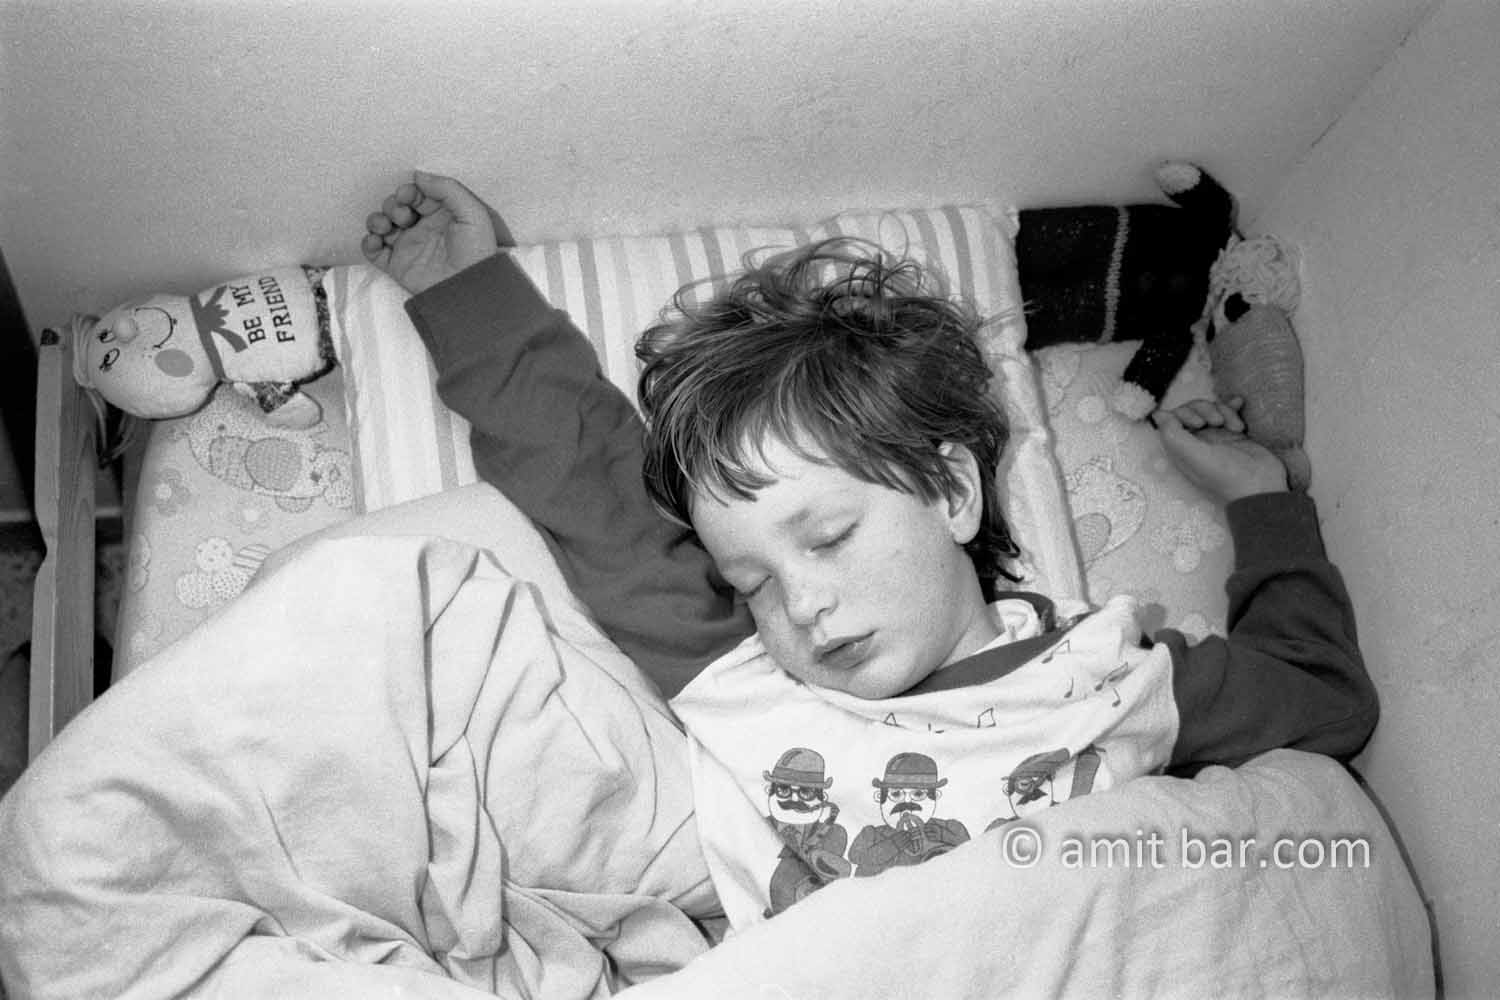 Dreaming II: A child is dreaming in his bed